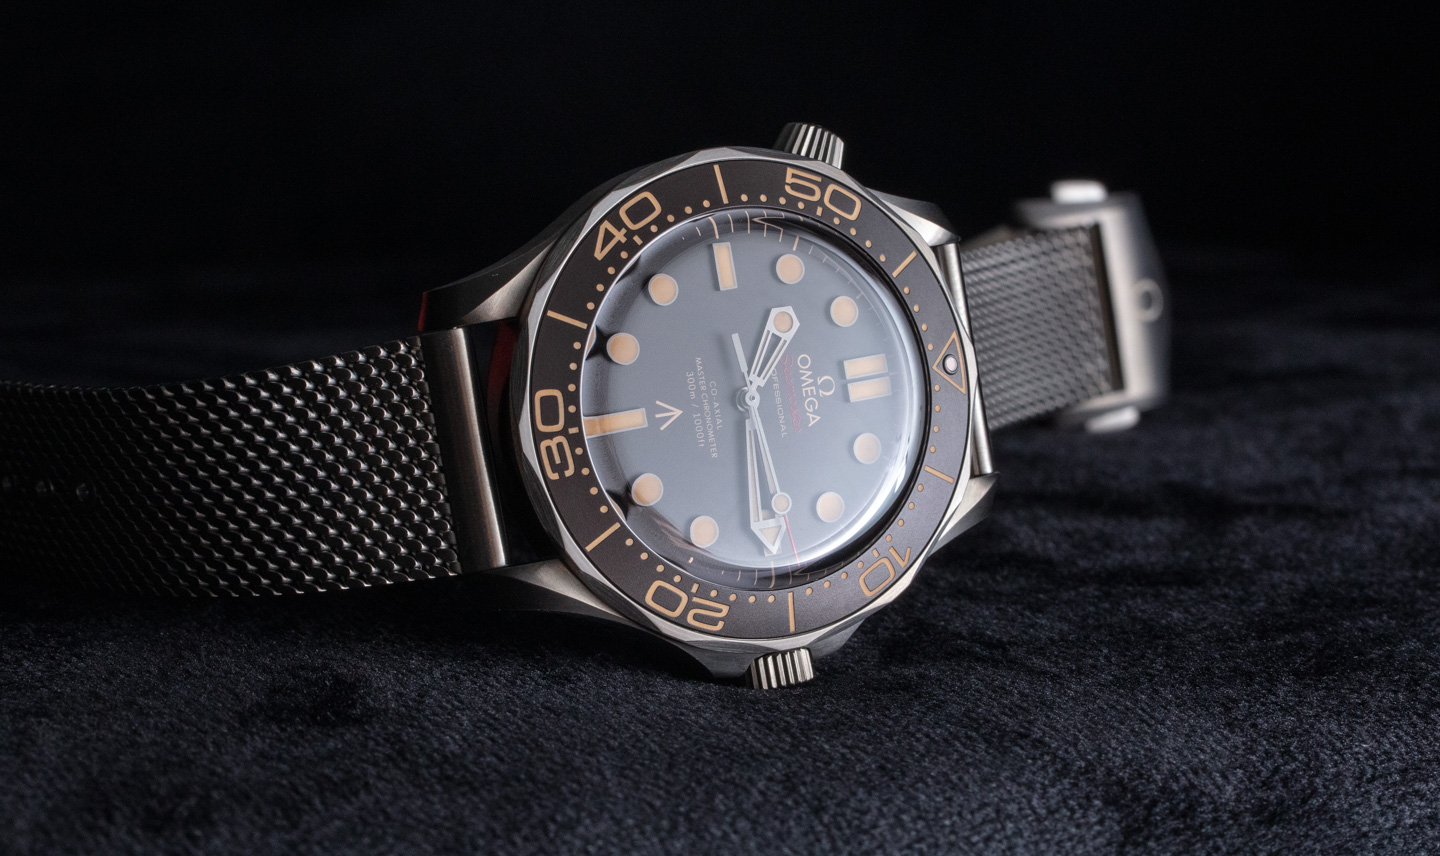 Hands On Omega Seamaster 300m 007 No Time To Die Watch For Daniel Craig Ablogtowatch